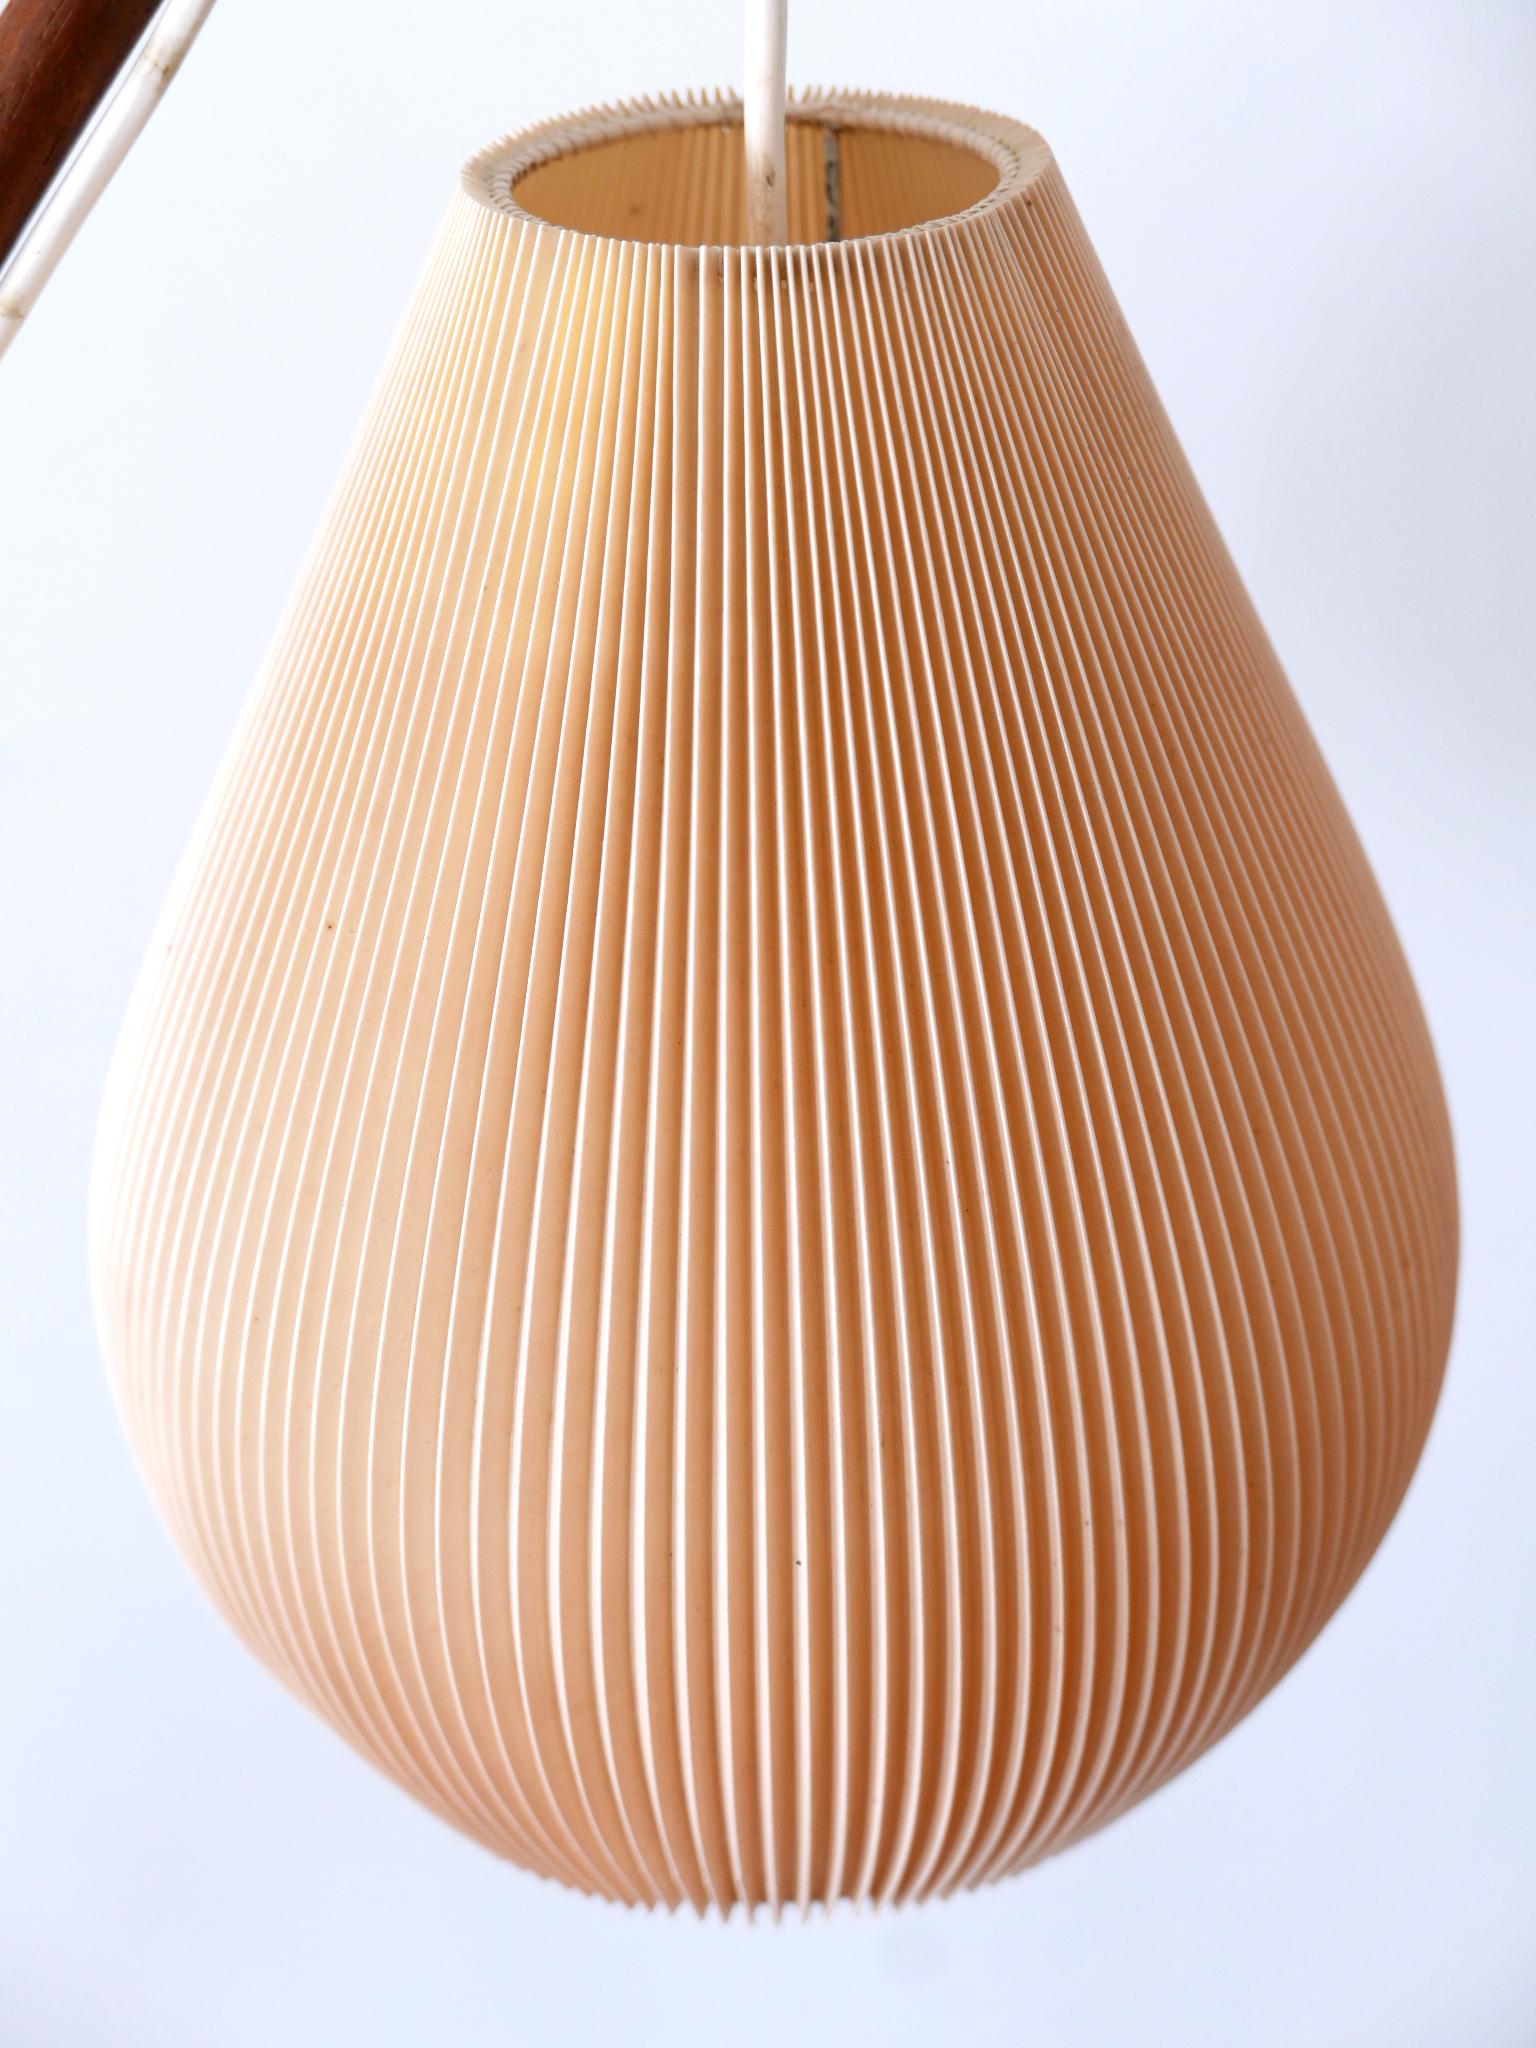 Exceptional 'Fishing Pole' Floor Lamp by Svend Aage Holm Sørensen Denmark 1950s For Sale 6